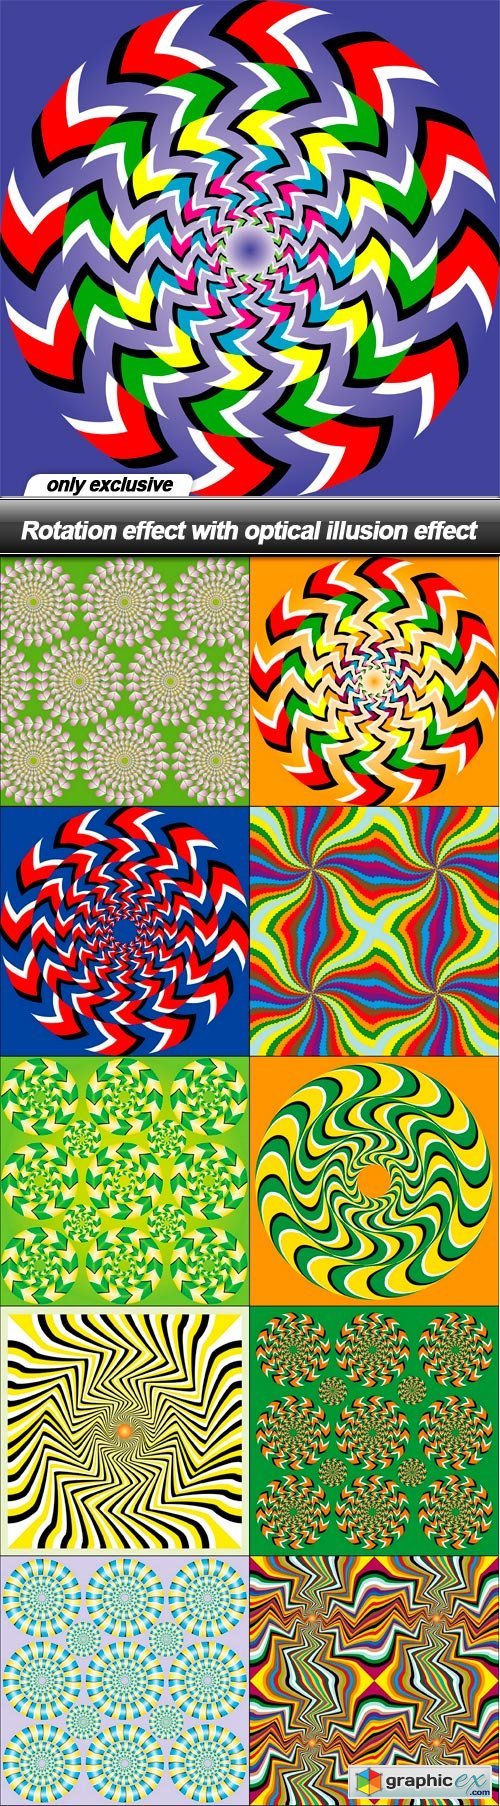 Rotation effect with optical illusion effect - 11 EPS